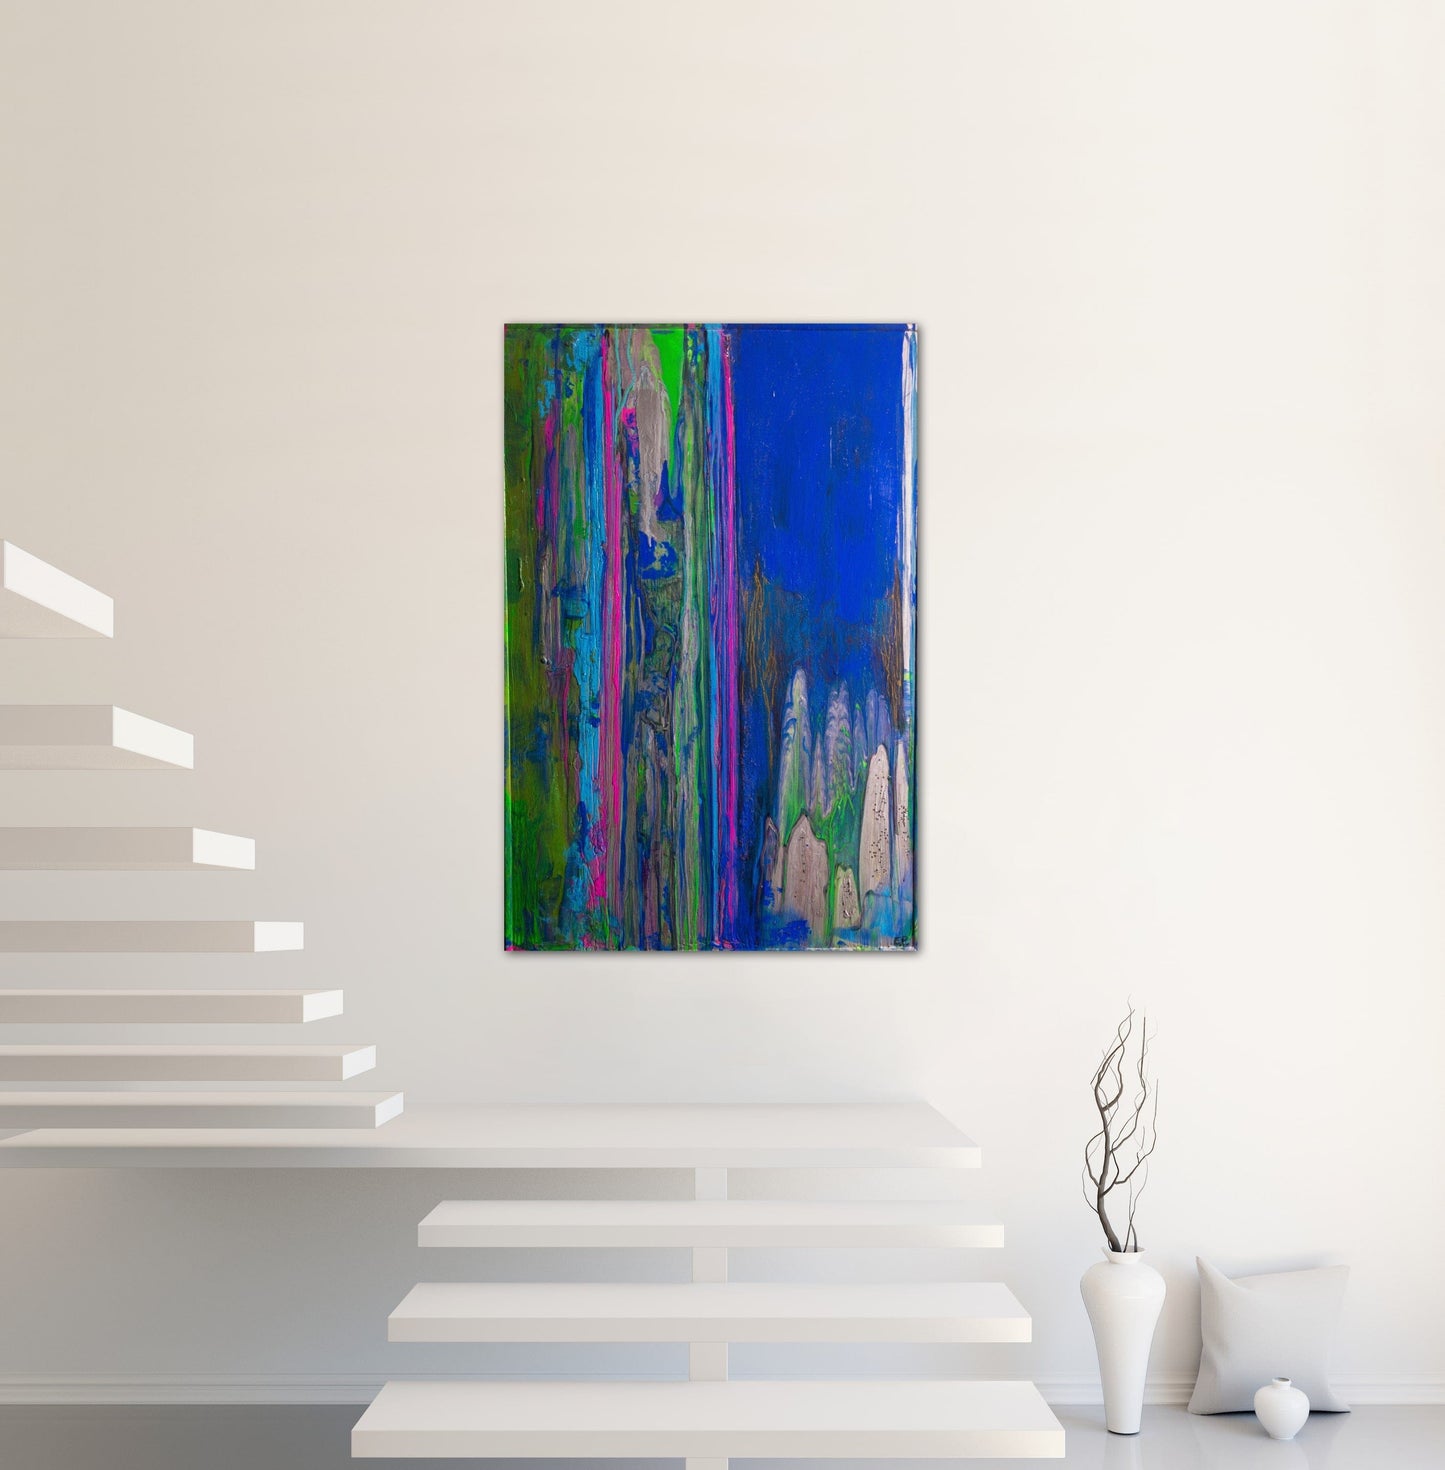 The Other Side - Large, Colorful And Textured, Space, Sparkly And Glossy, Abstract Design On Veneer, Painting By Art with Evie